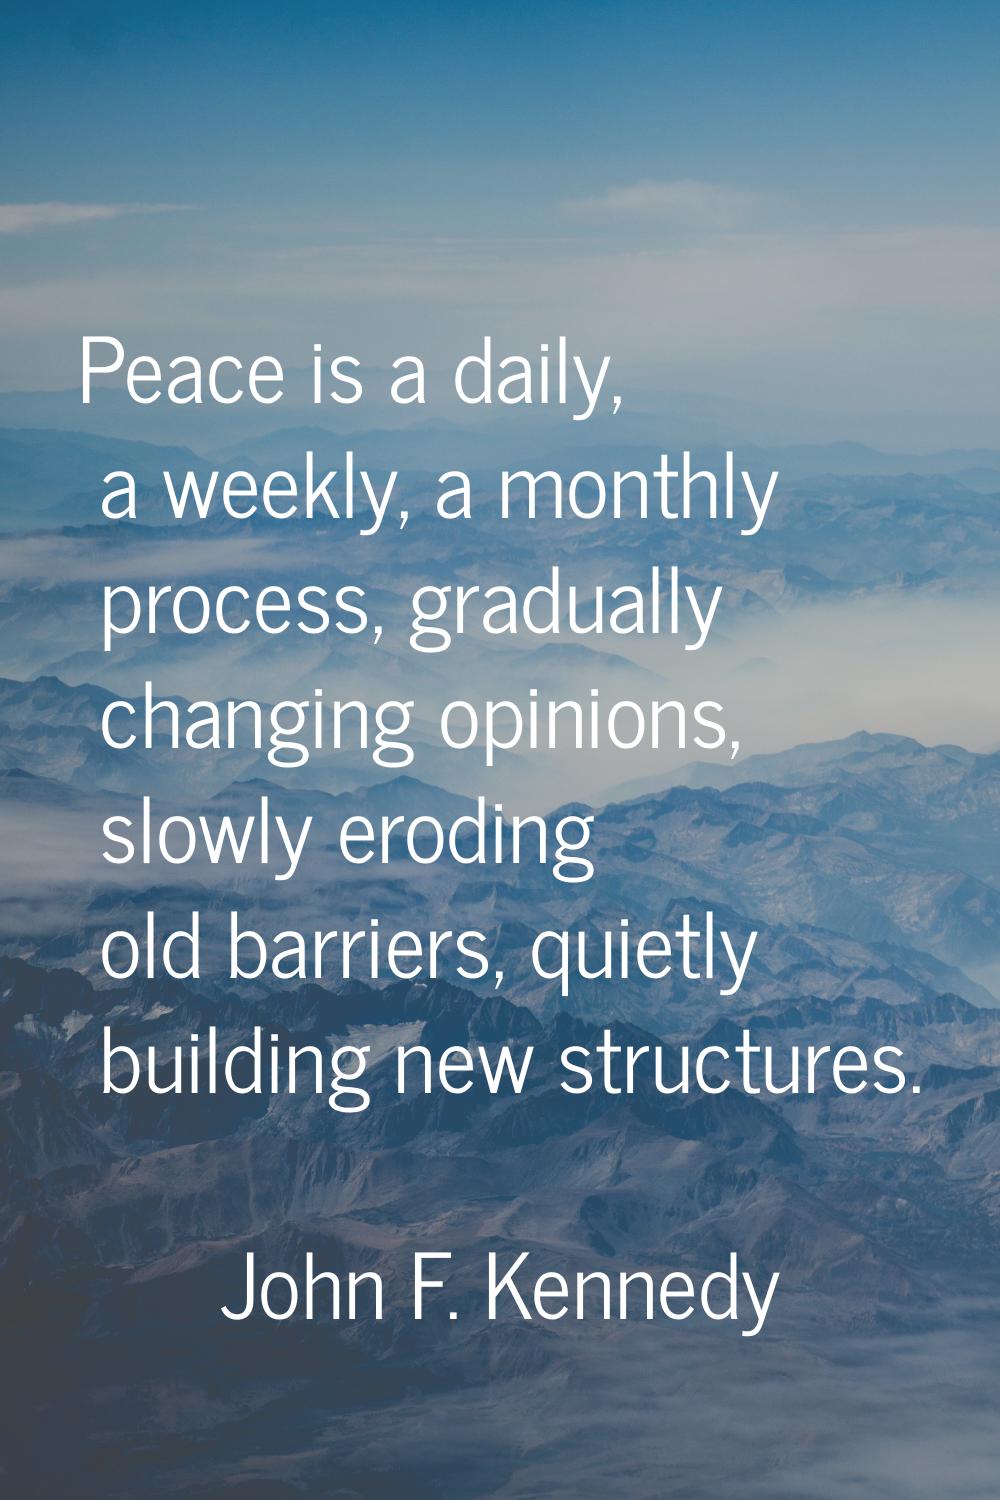 Peace is a daily, a weekly, a monthly process, gradually changing opinions, slowly eroding old barr